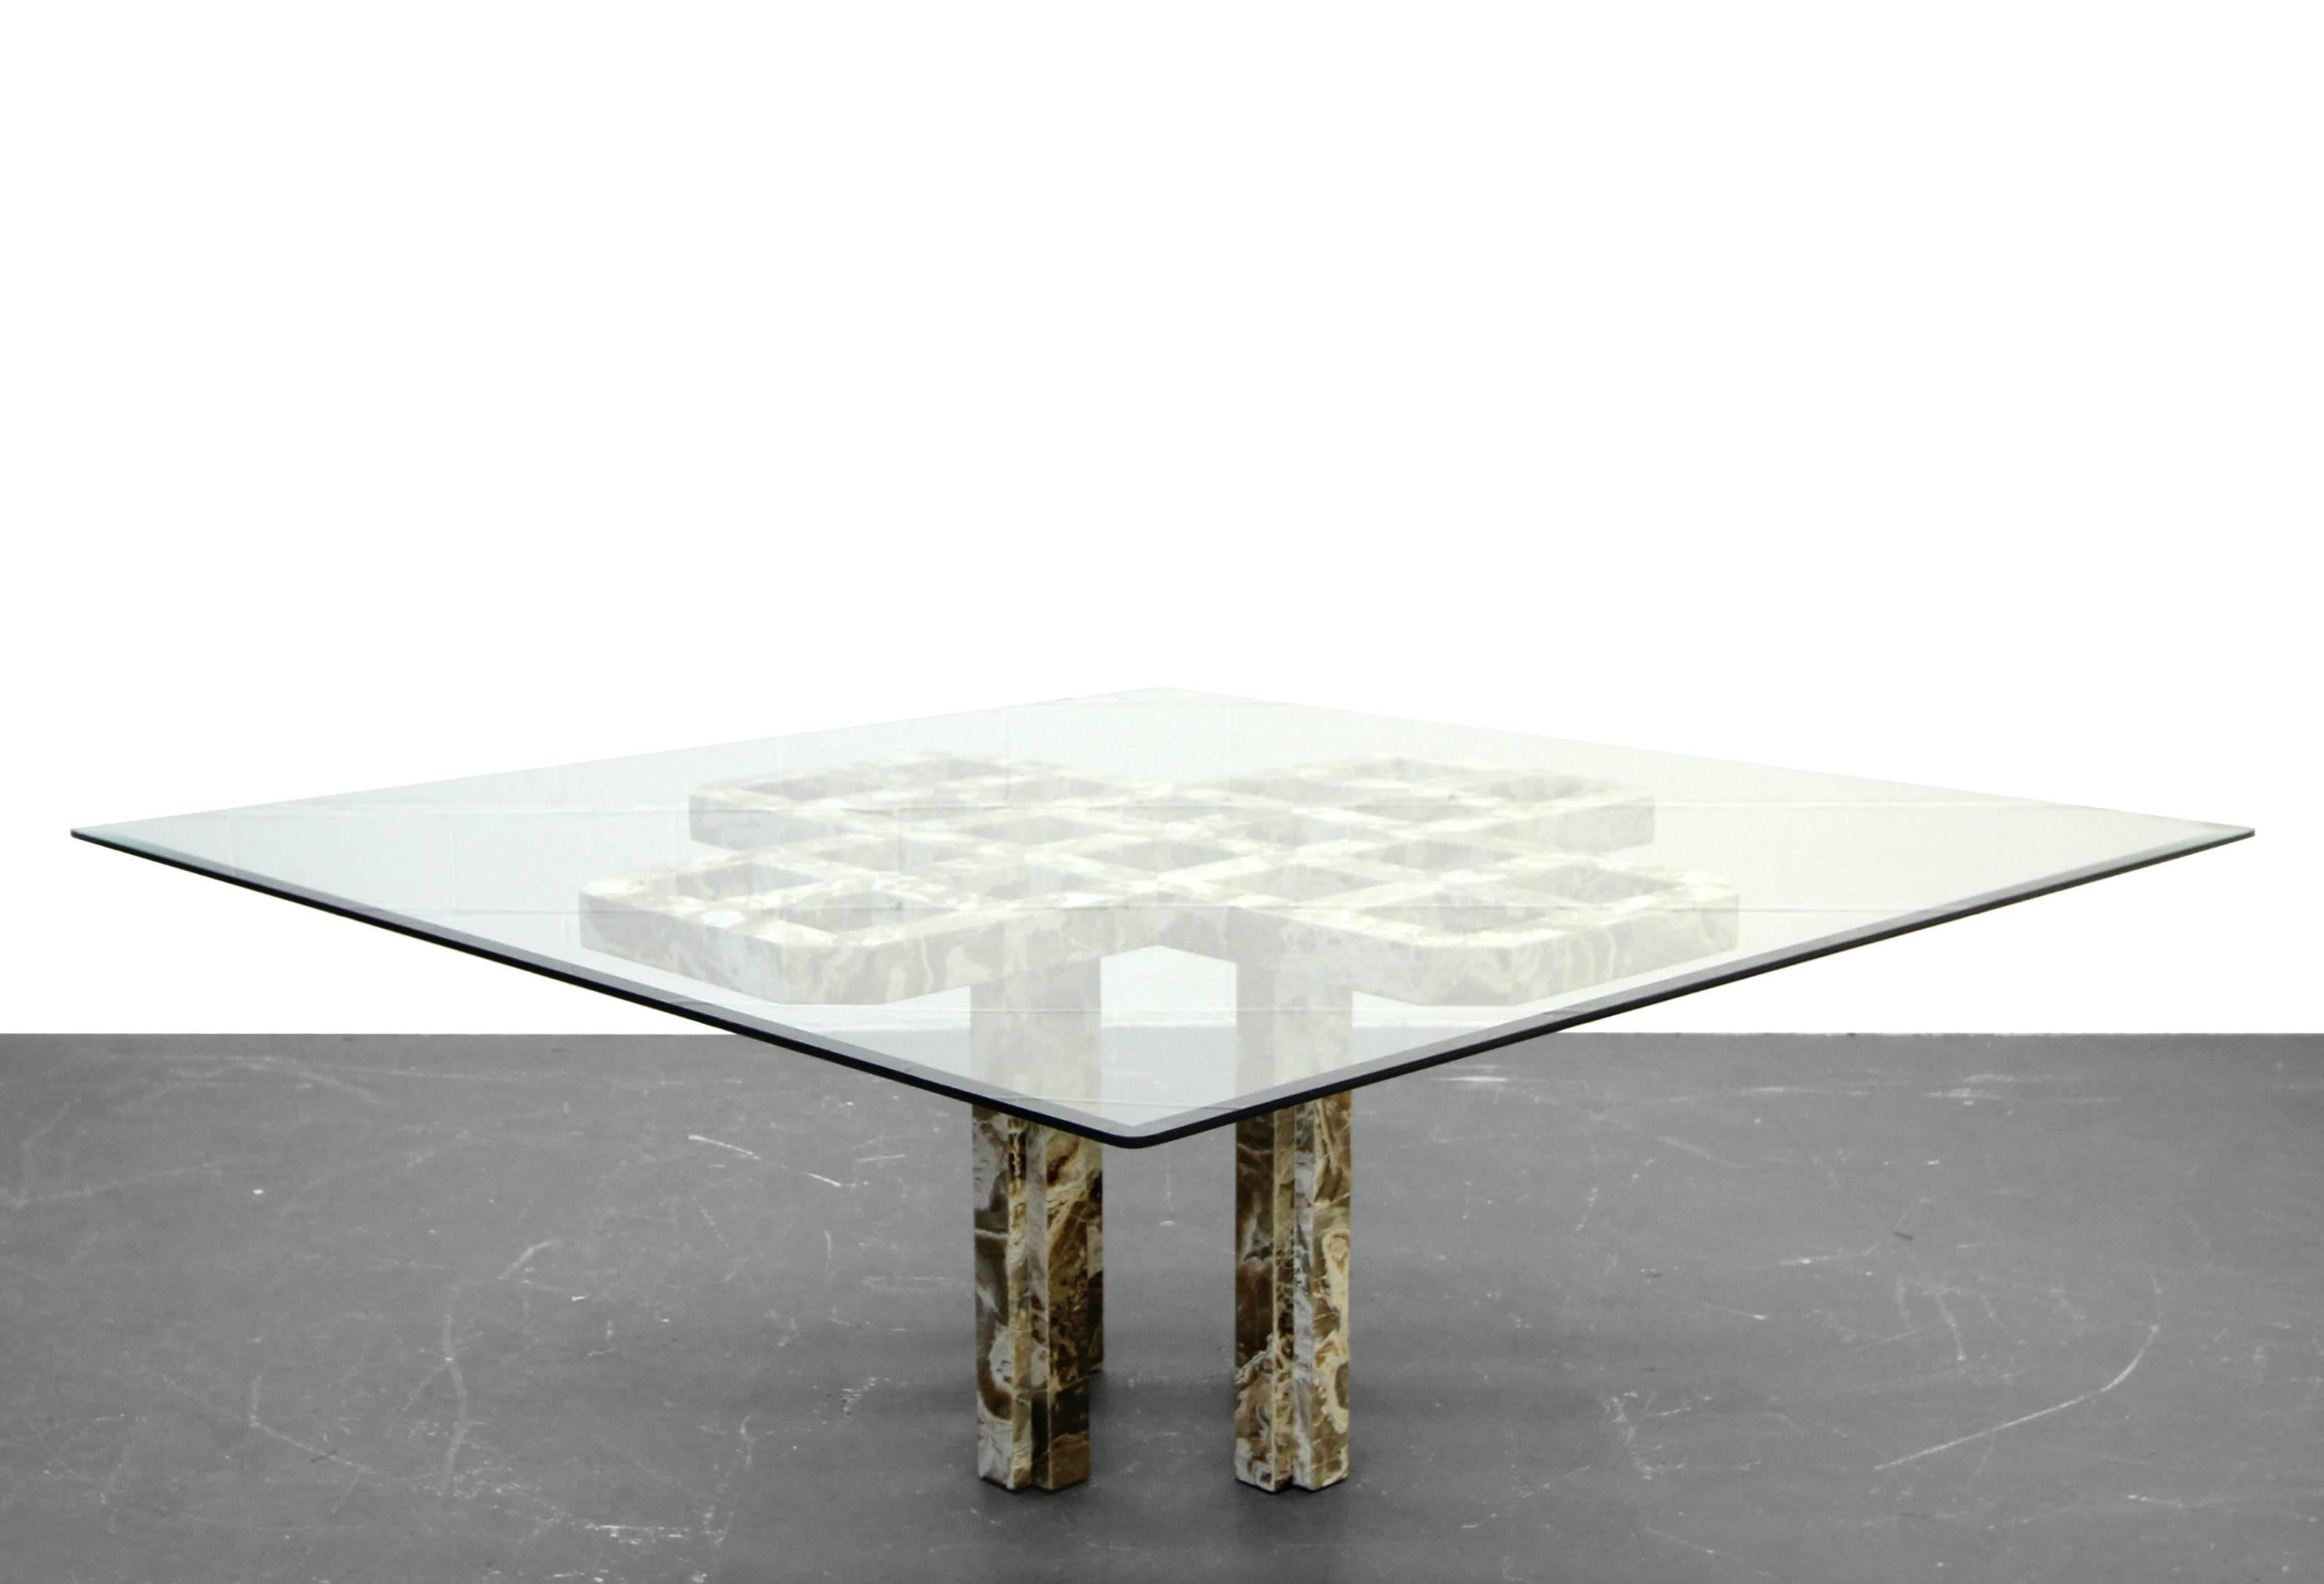 Beautiful custom onyx dining table. Very intricate, beautiful piece, perhaps one of a kind. Lattice designed top and 4 legs constructed of caramel and cream onyx in the shape of an X or a T depending on how you view it. This is a massive piece that